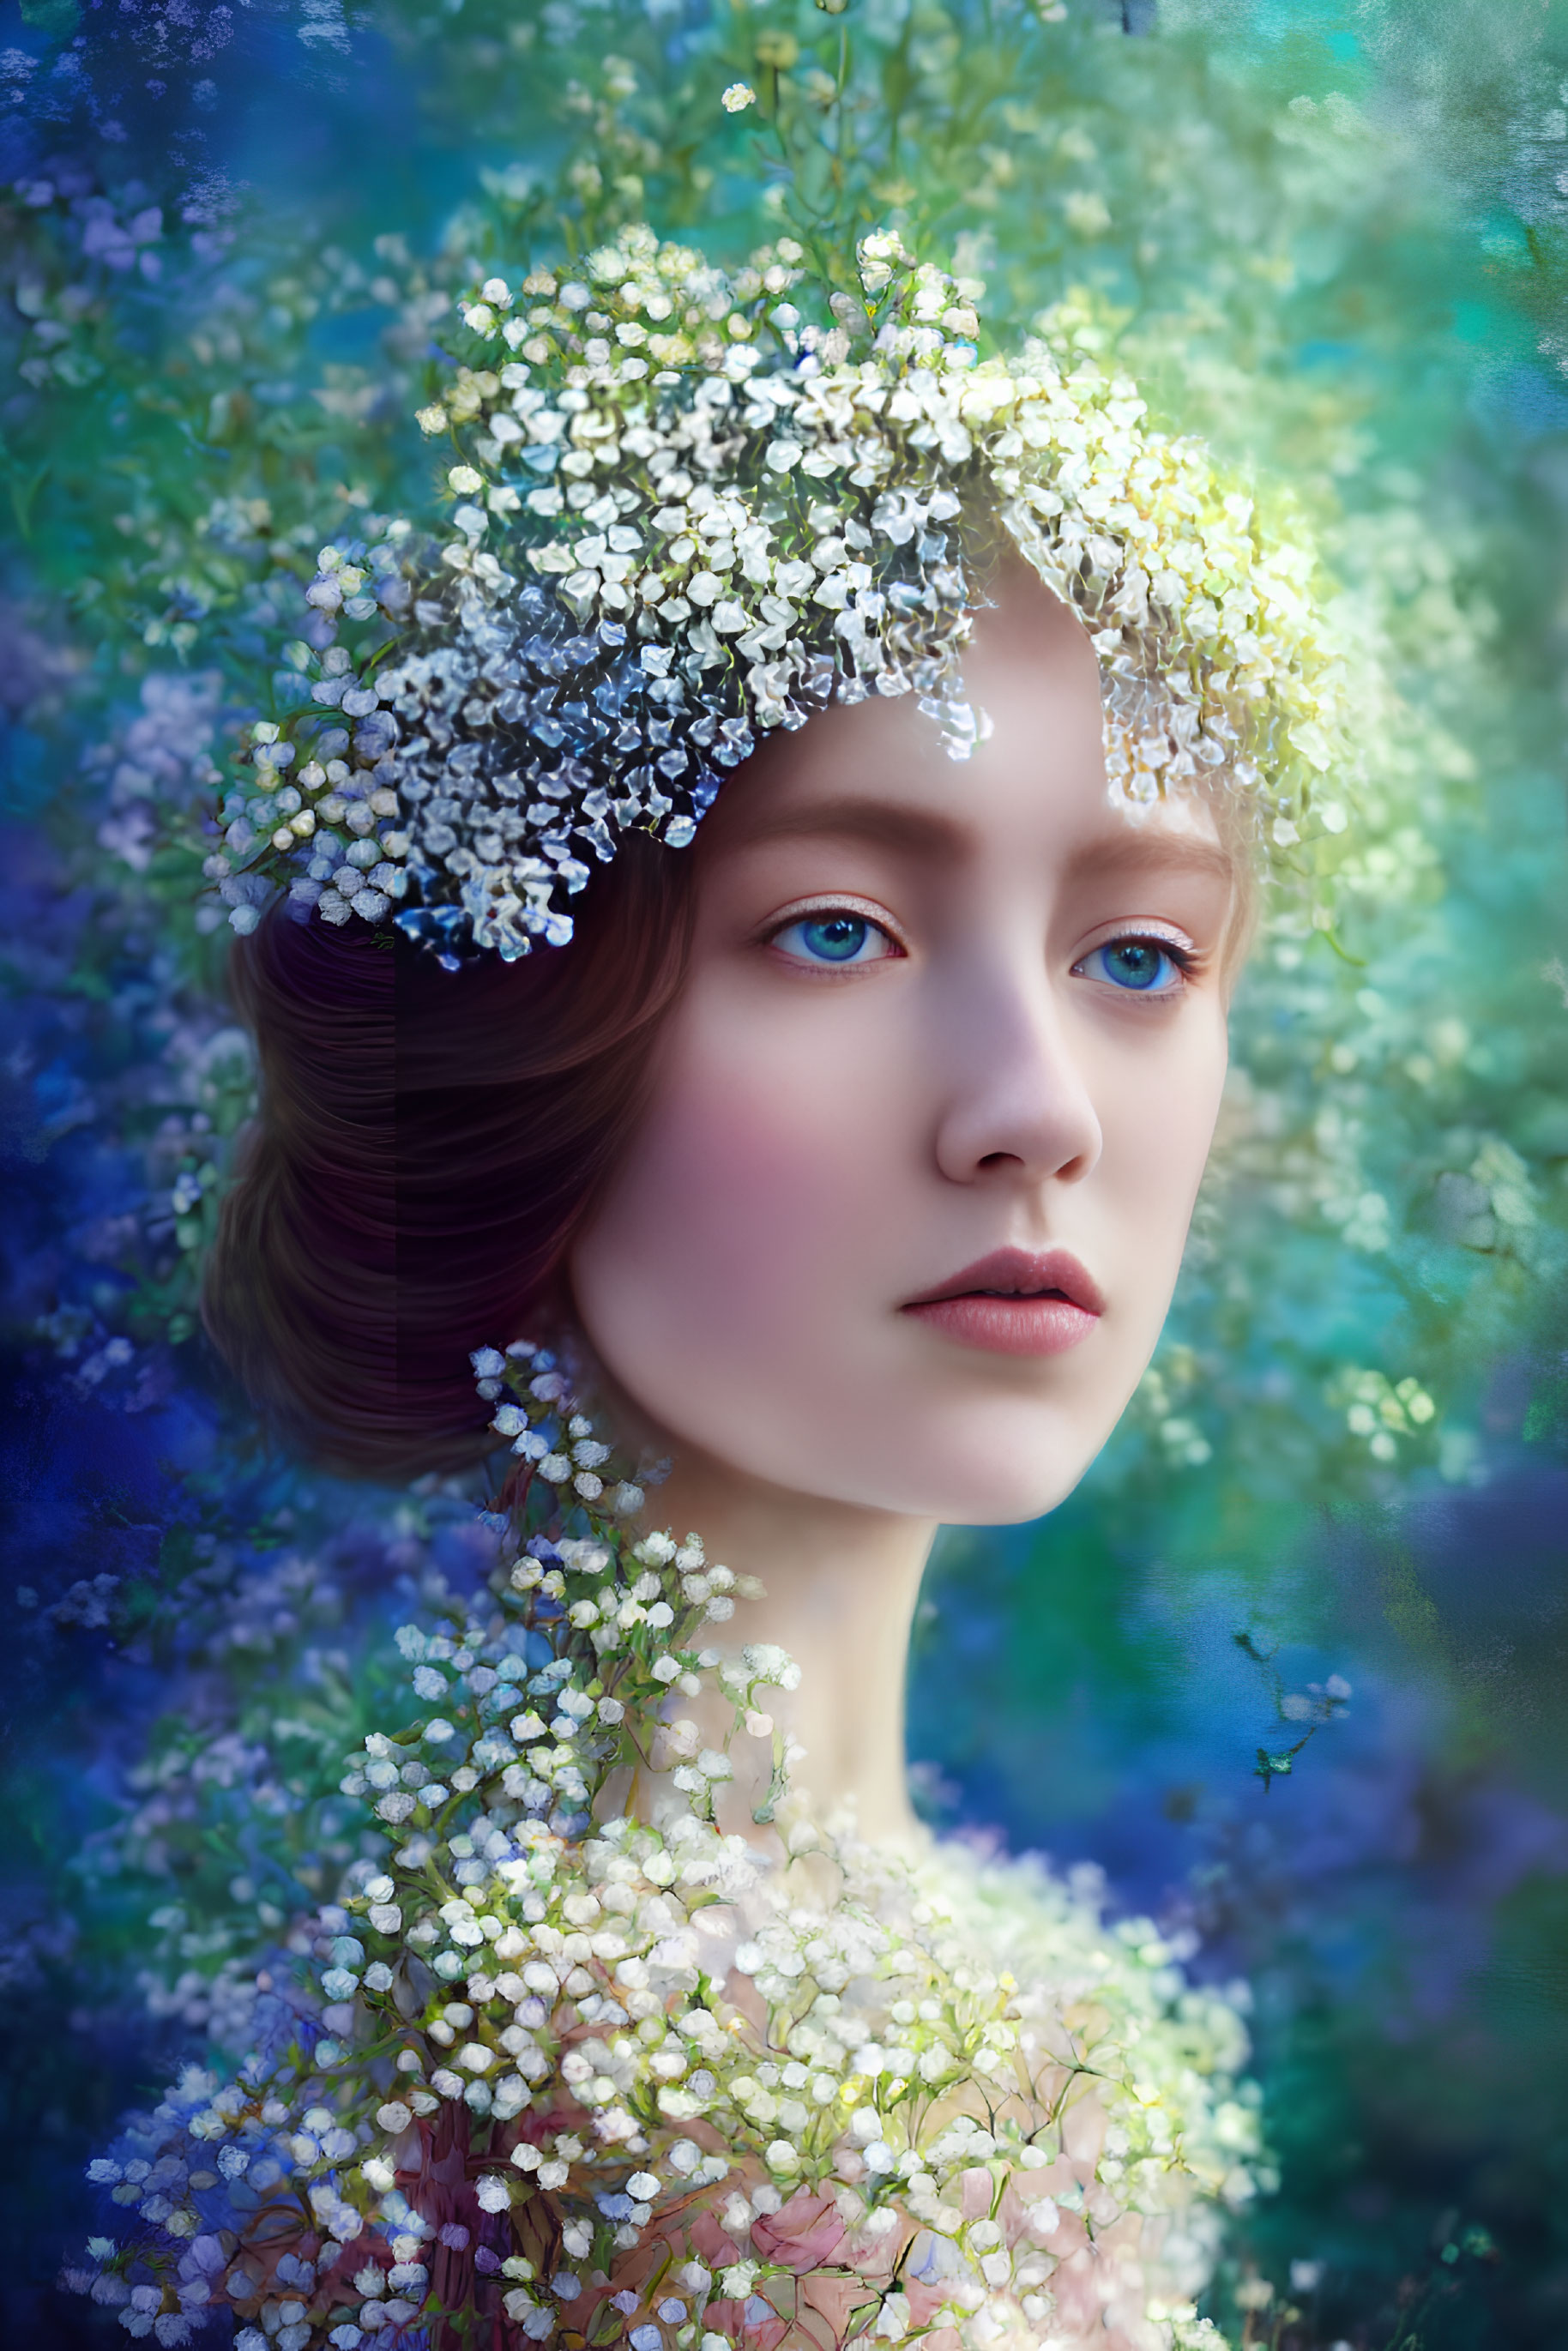 Digital Artwork: Woman with Floral Crown in Blue-Toned Background